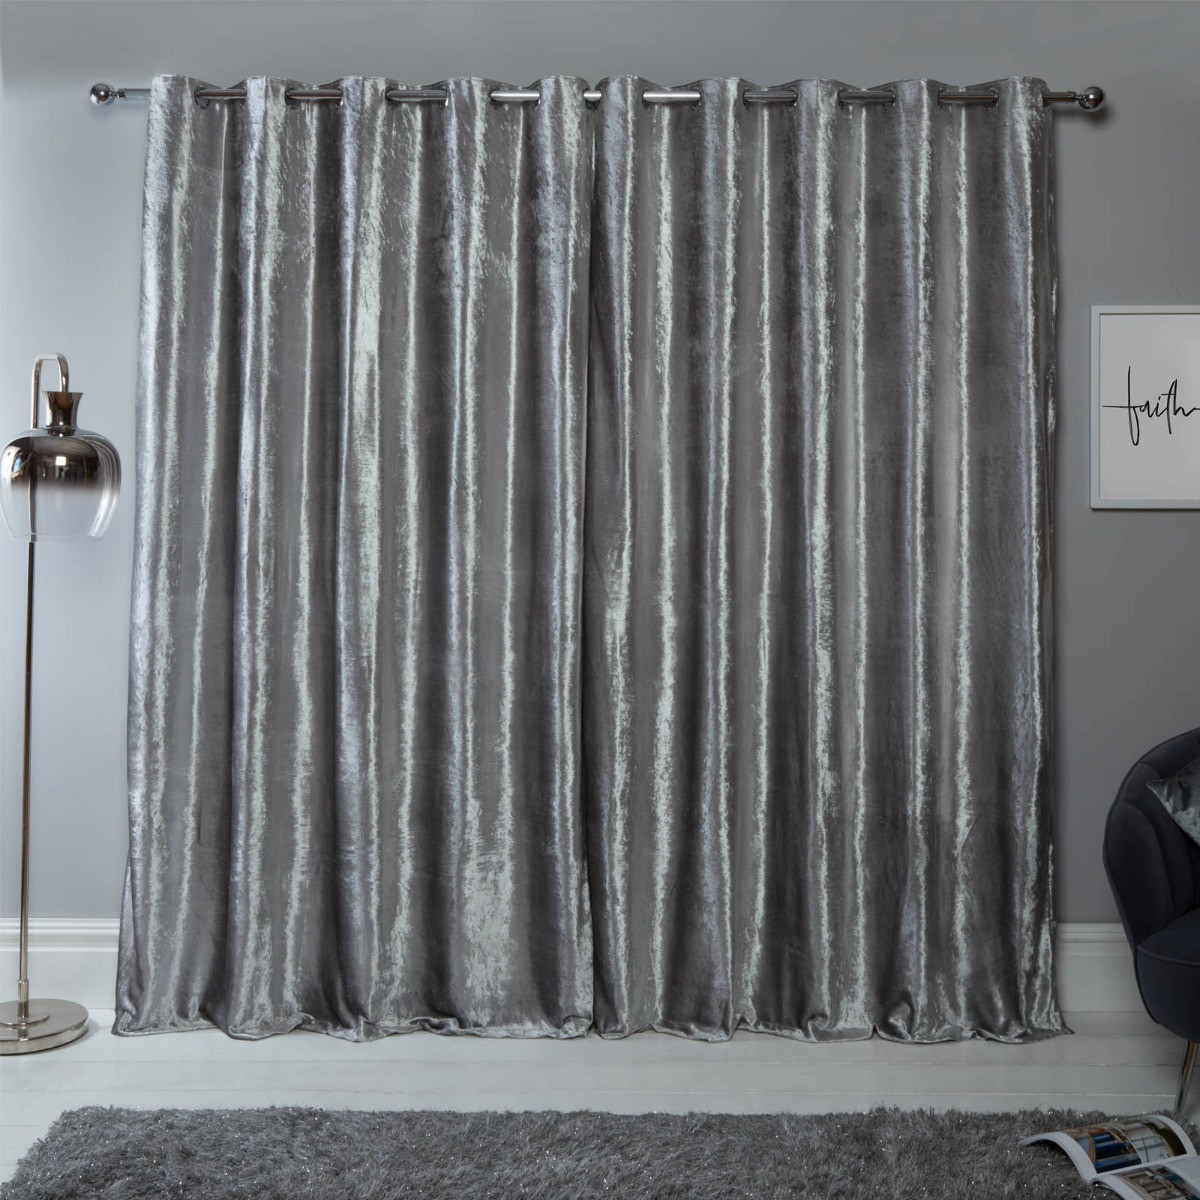 Sienna Home Crushed Velvet Eyelet Curtains - Silver 66" x 54">